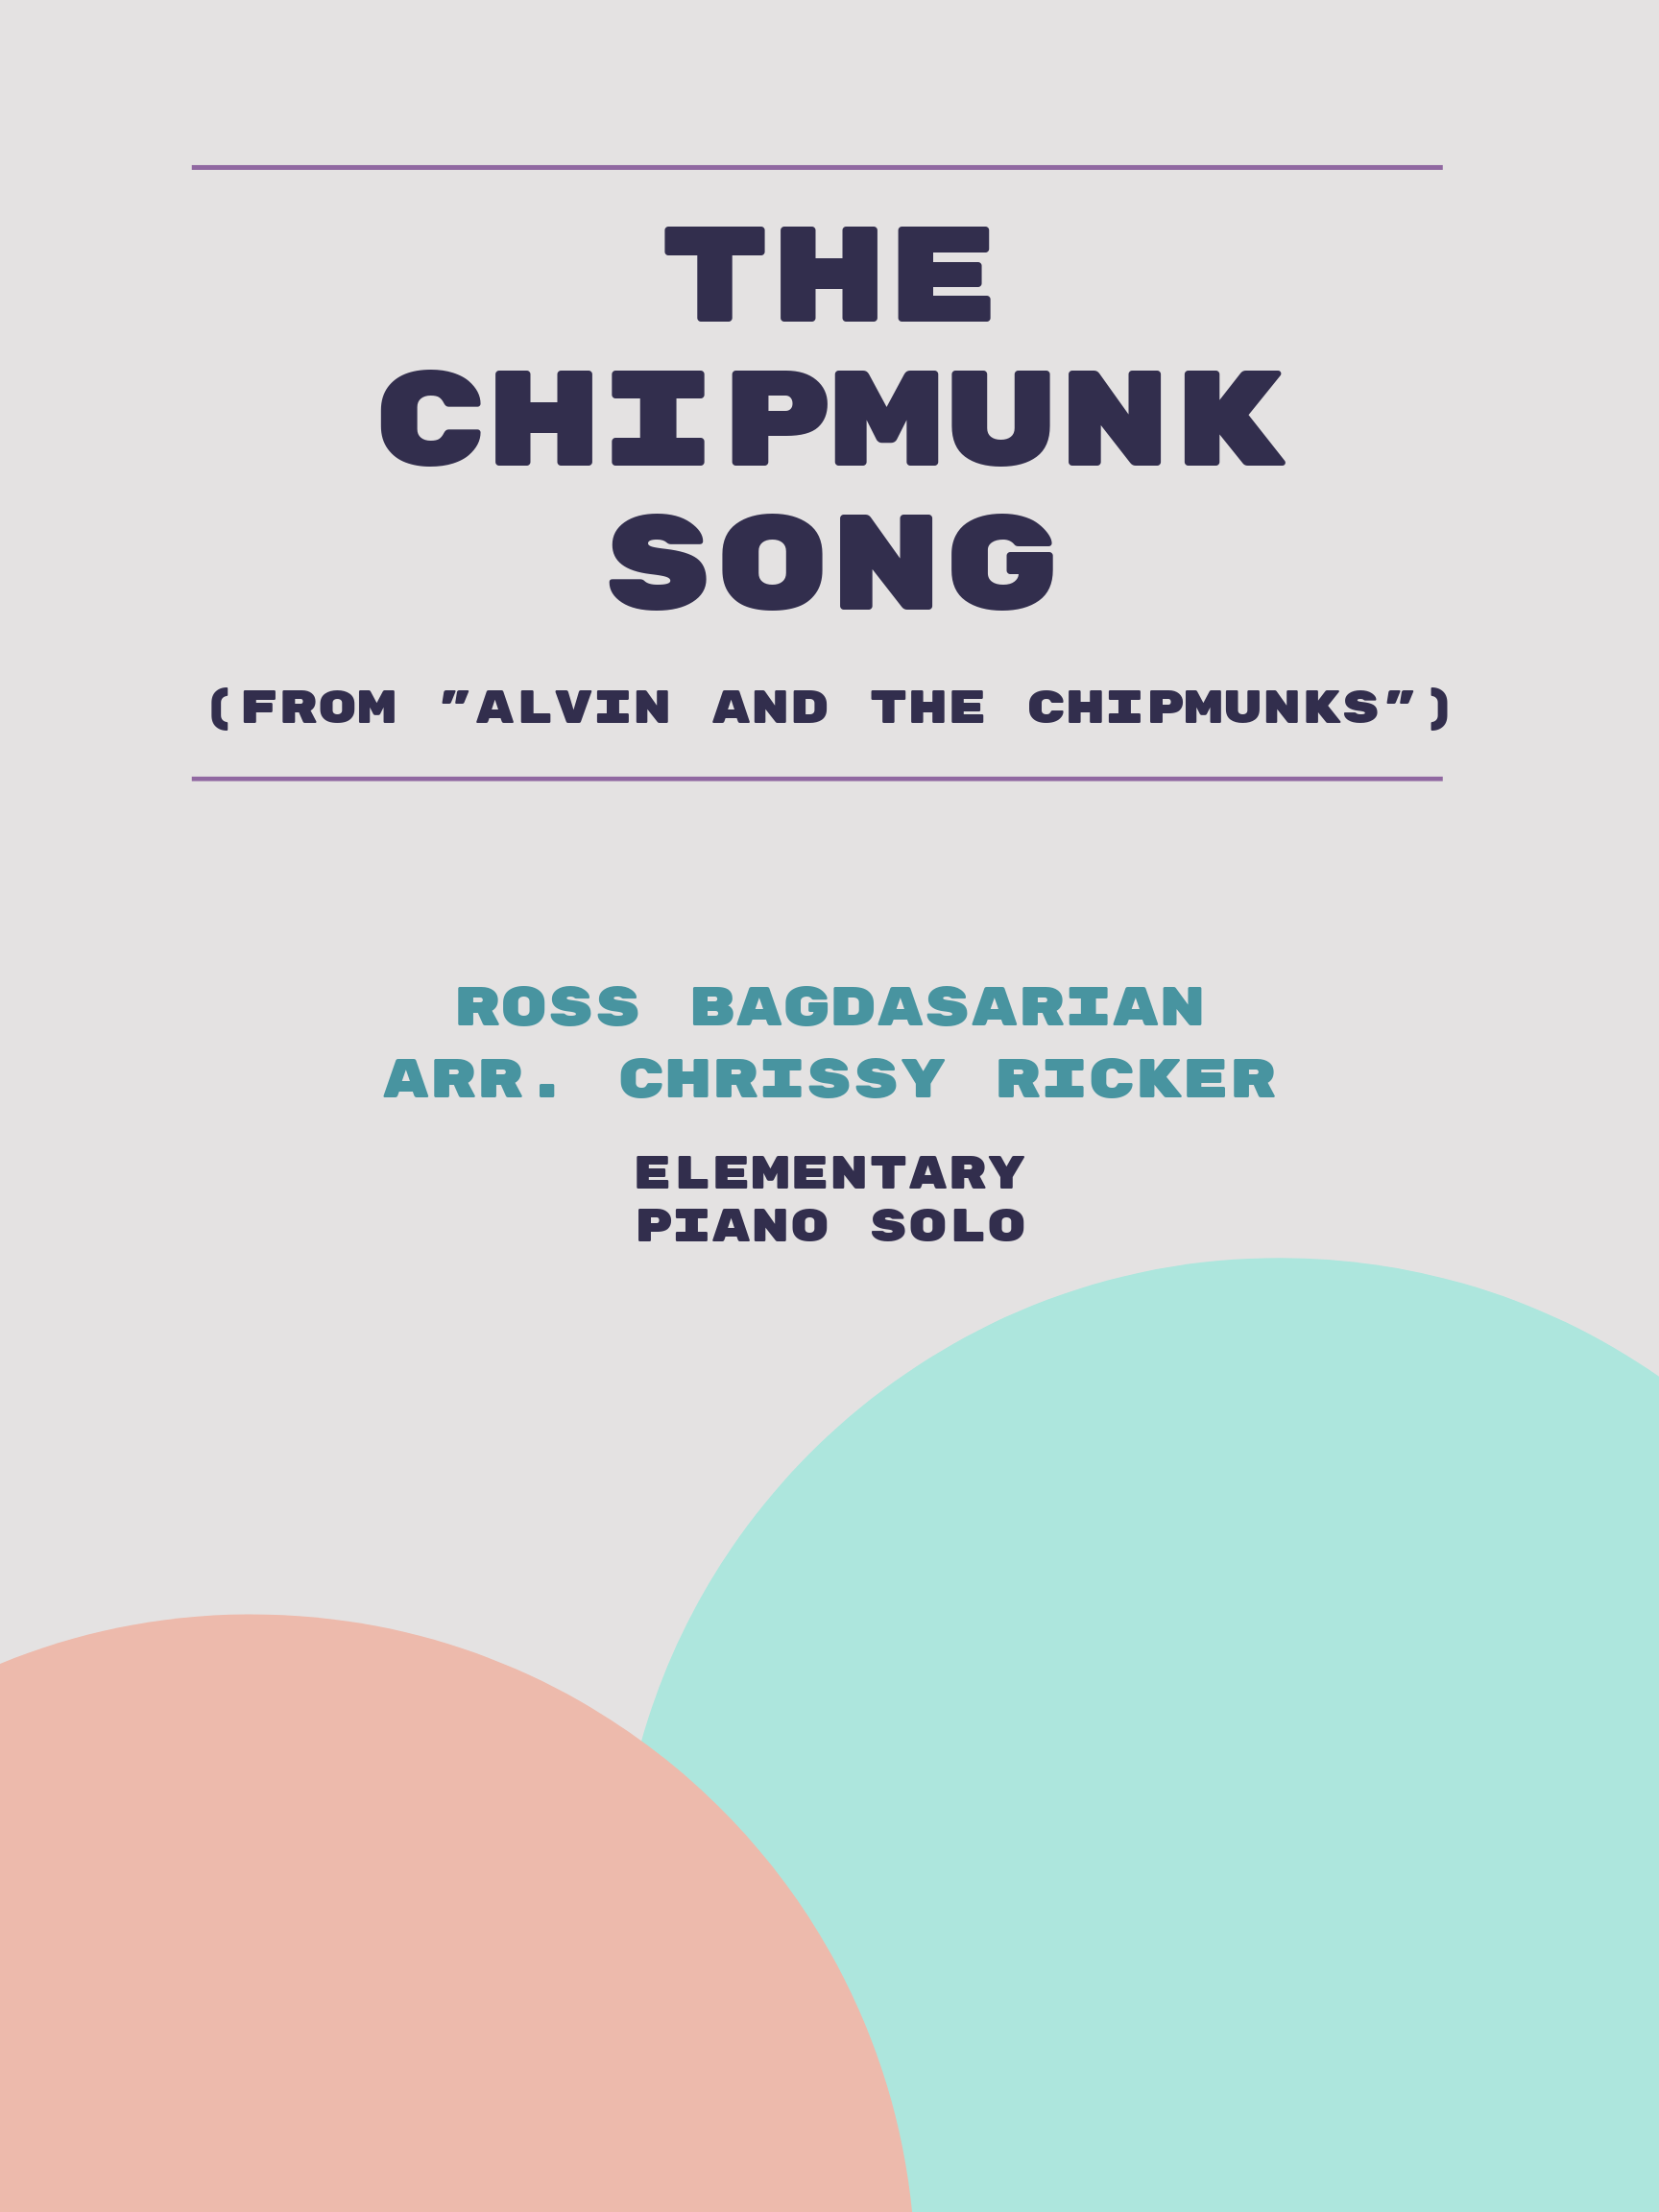 The Chipmunk Song Sample Page